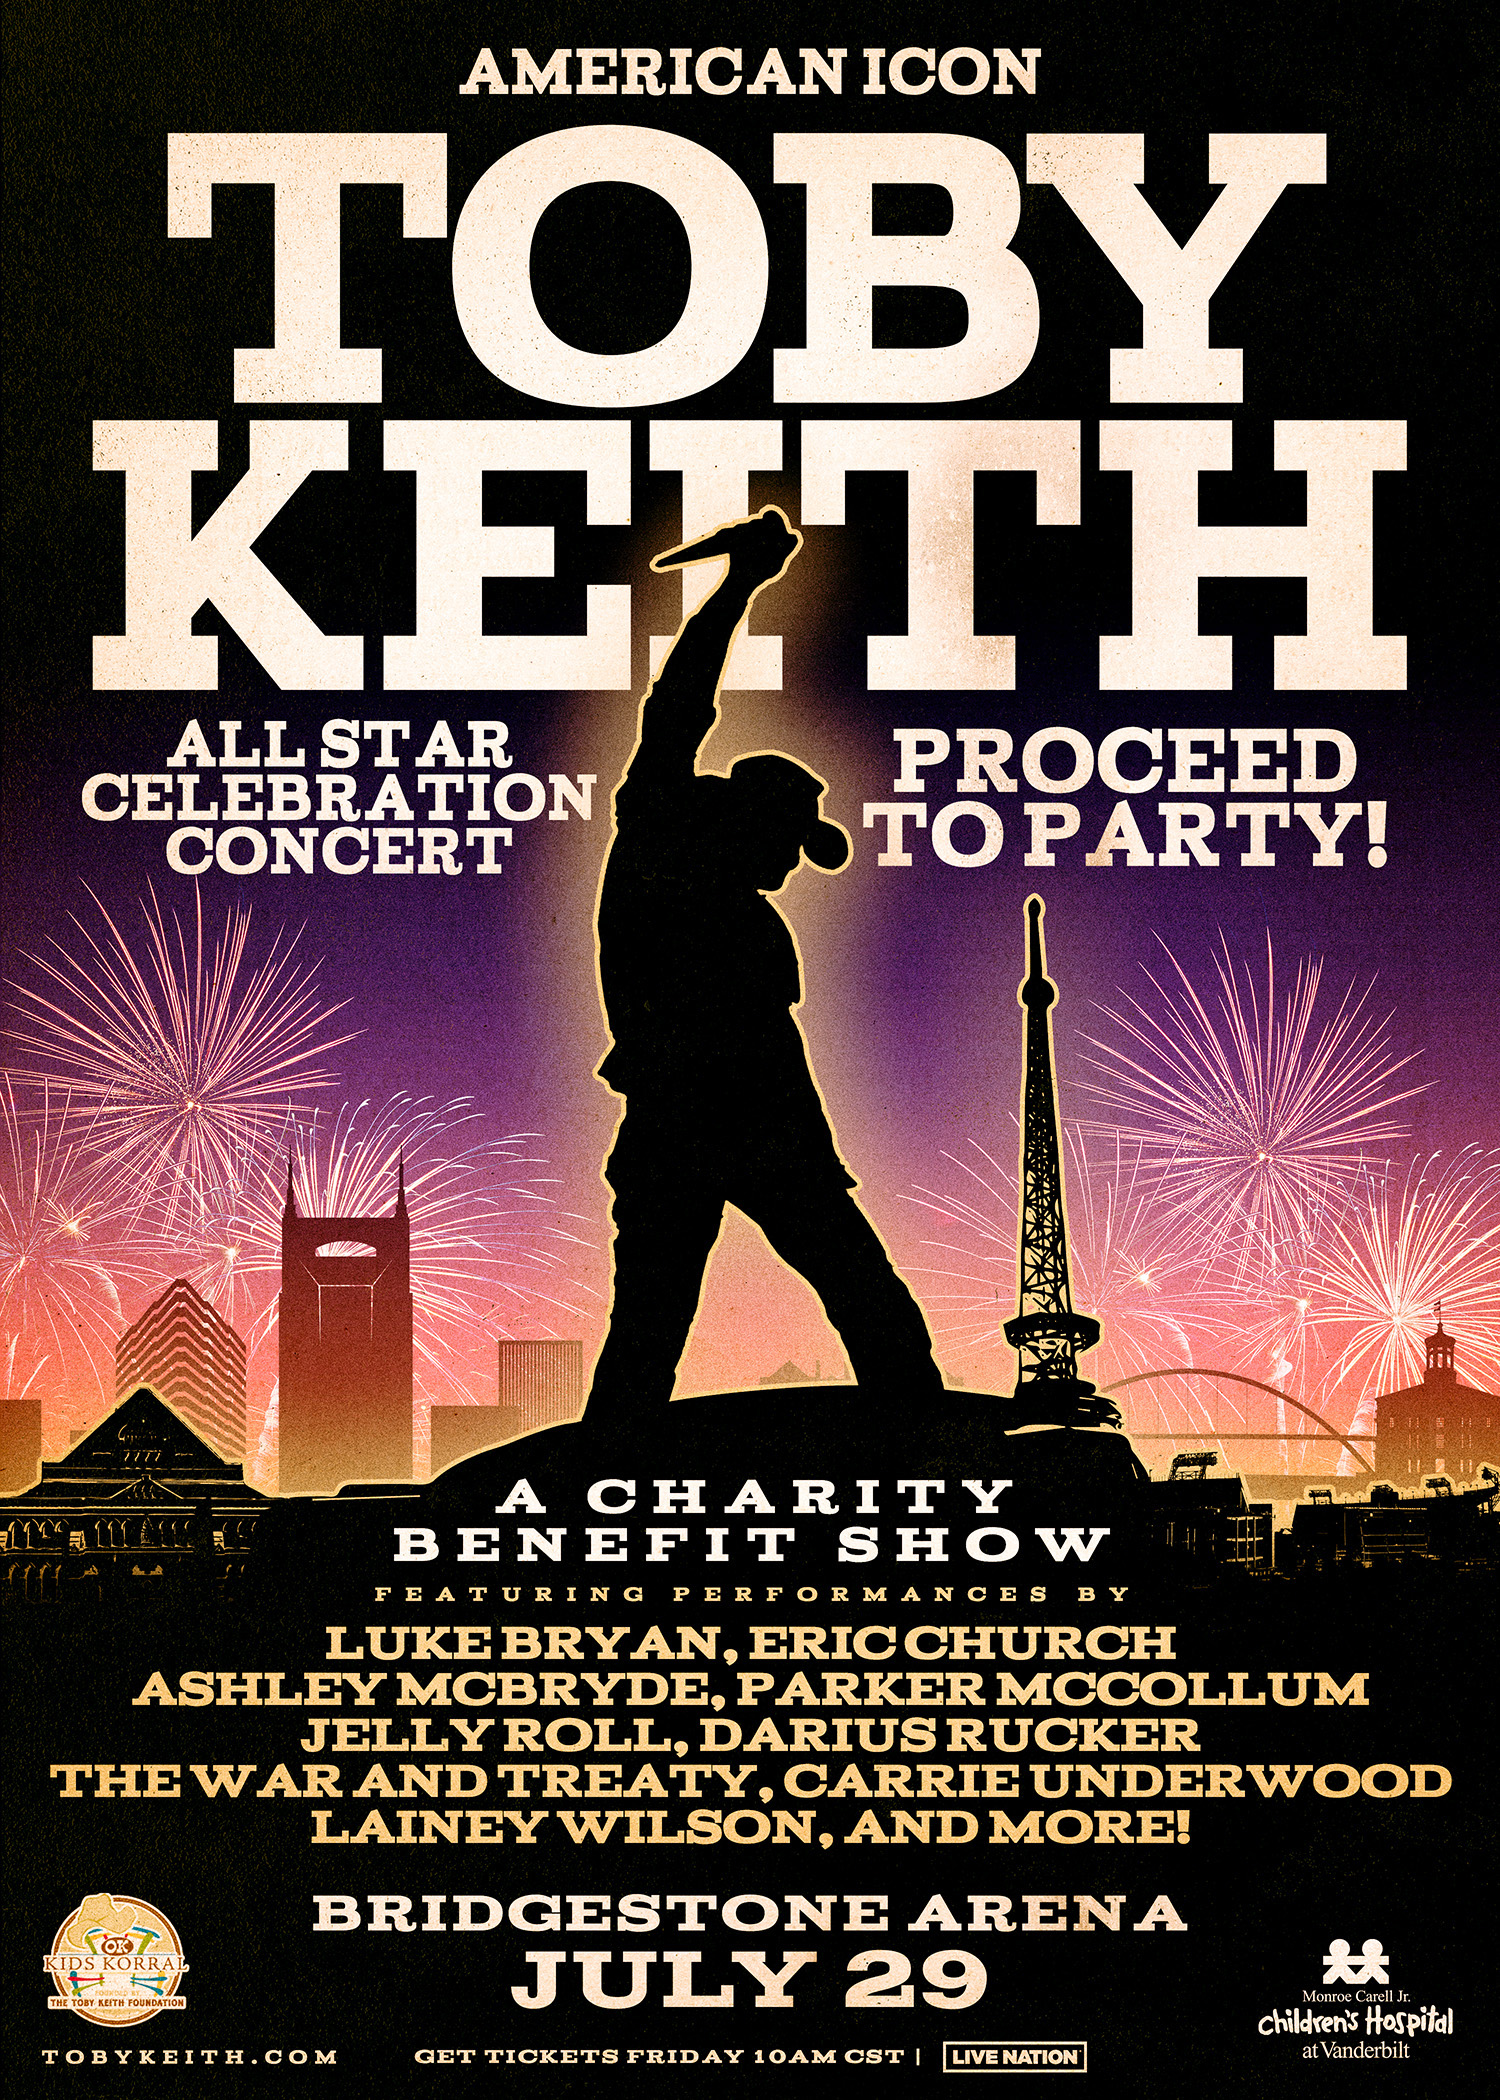 American Icon Toby Keith All Star Celebration Concert - Nashville, TN